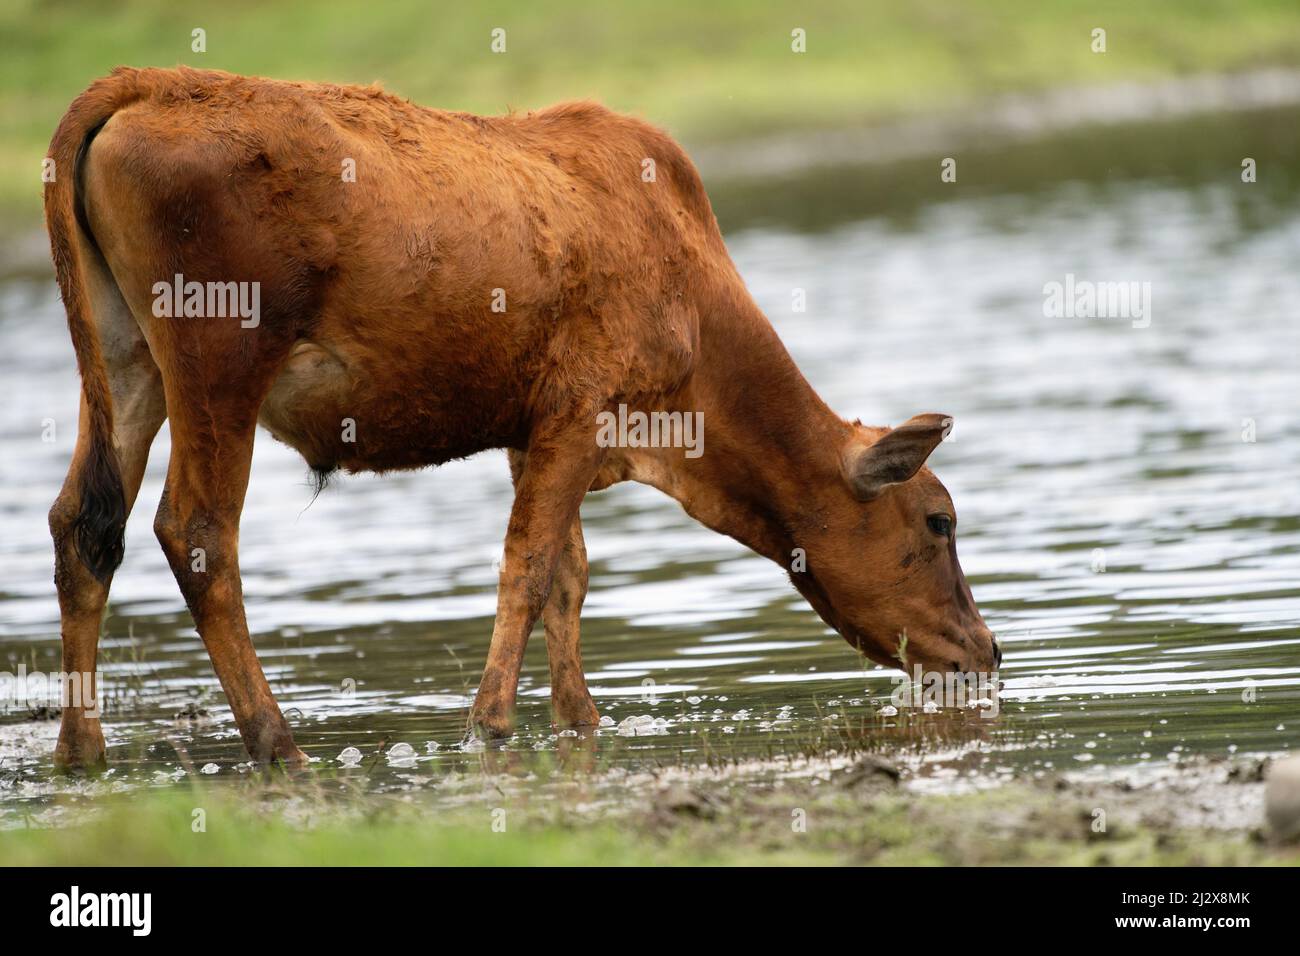 Asian Cows grazing and calf day Stock Photo